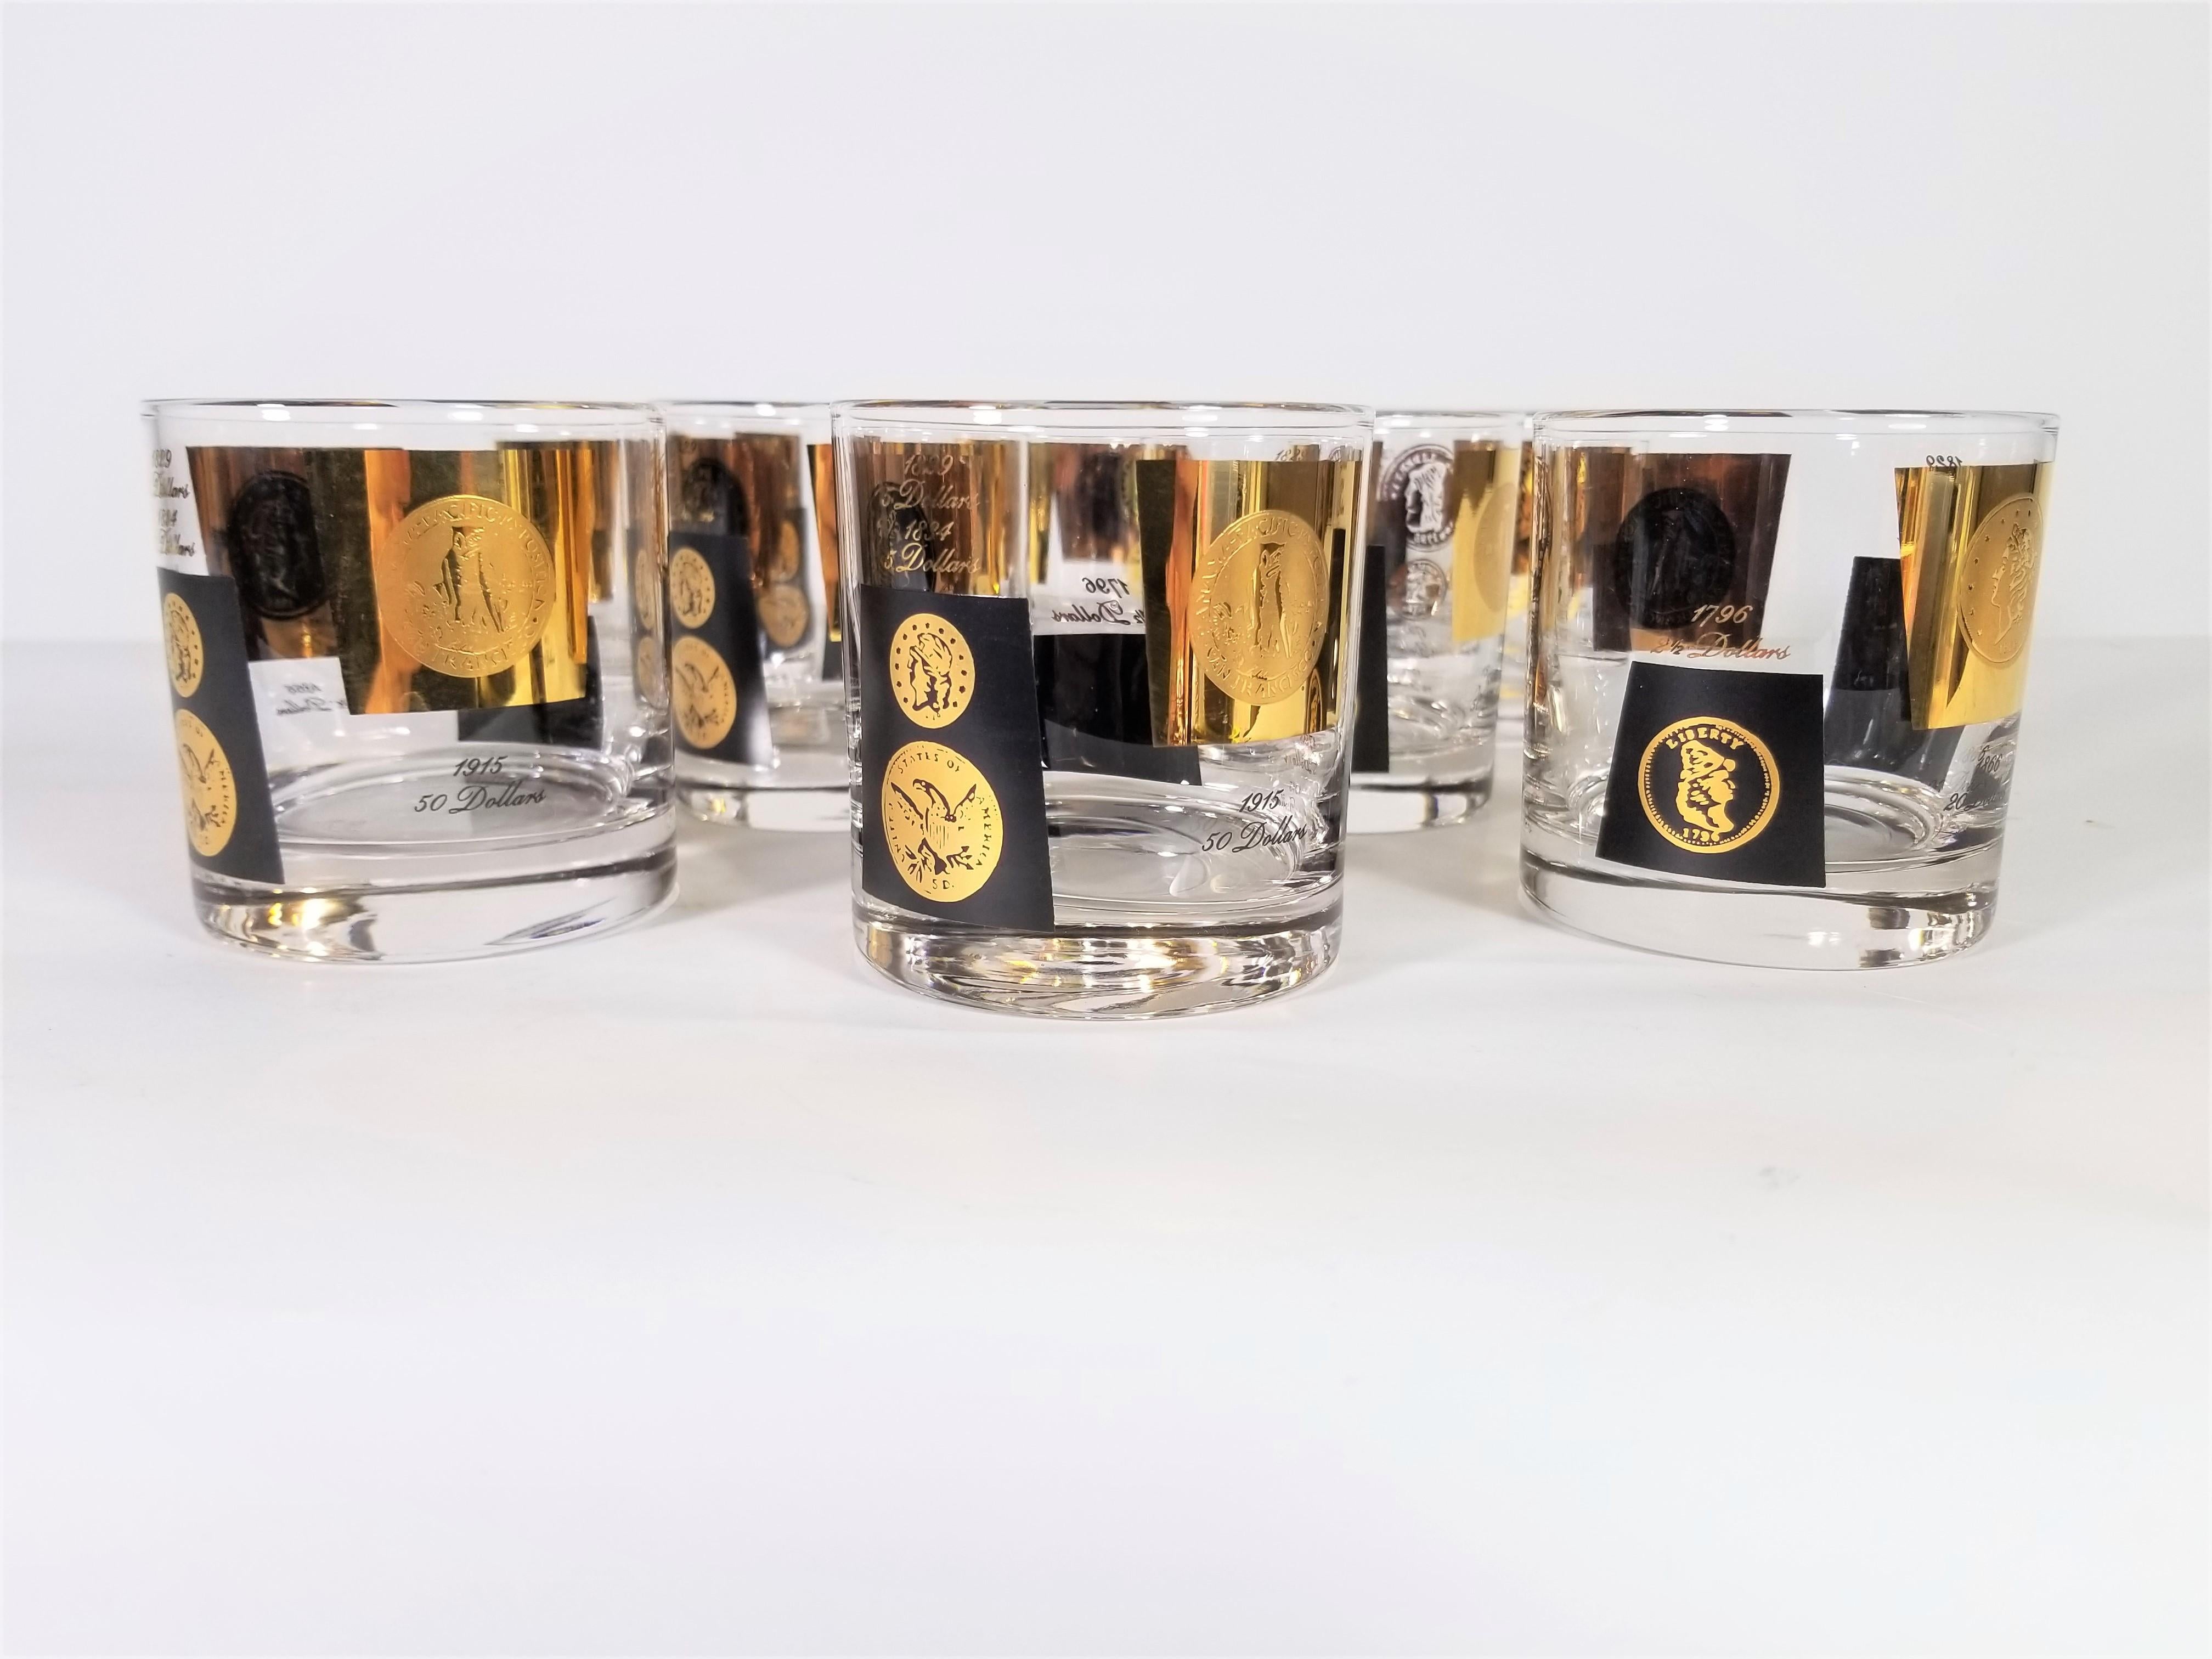 Set of 8 midcentury low ball or rocks glasses produced by Cera. Raised gold textured coin and black design. Excellent condition.